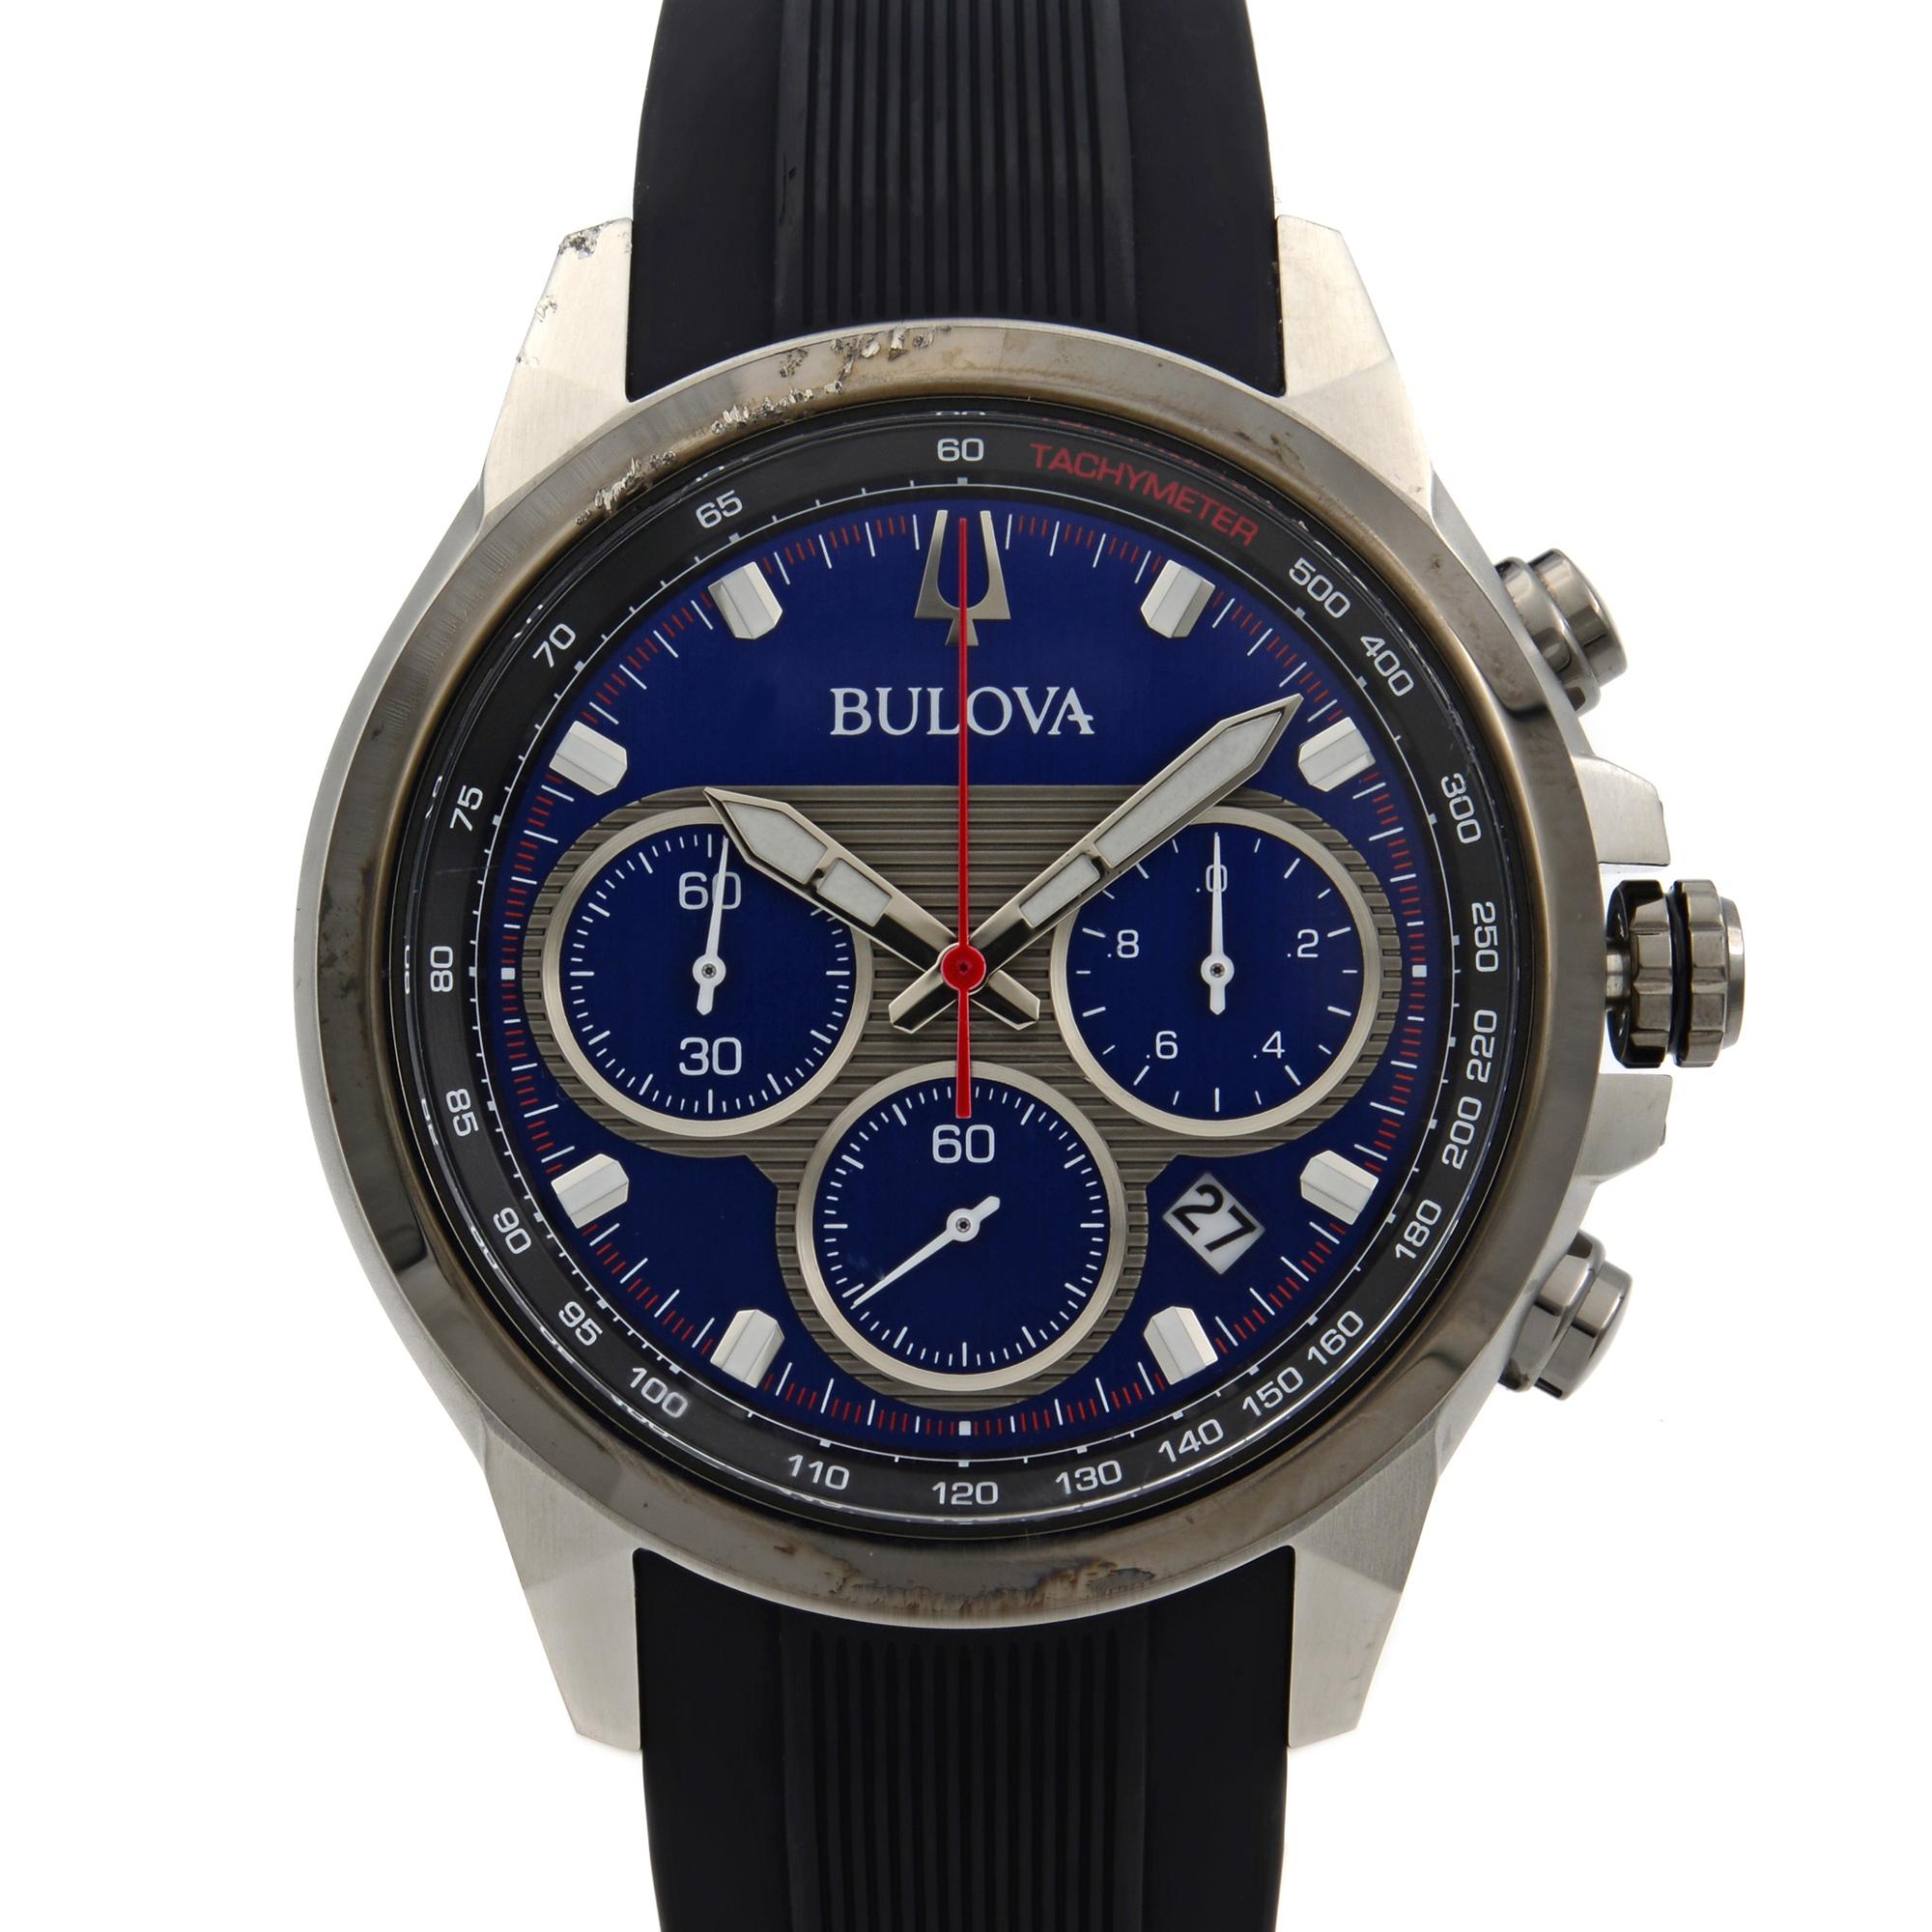 Pre-owned Bulova Marine Star Steel Rubber Chronograph Blue Dial Mens Quartz Watch 98B314. Visible Damage on the Bezel, and Top Left Lug As Seen in Photos. This Time Piece is Powered By a Quartz Battery and Features a Steel Case with a Black Rubber